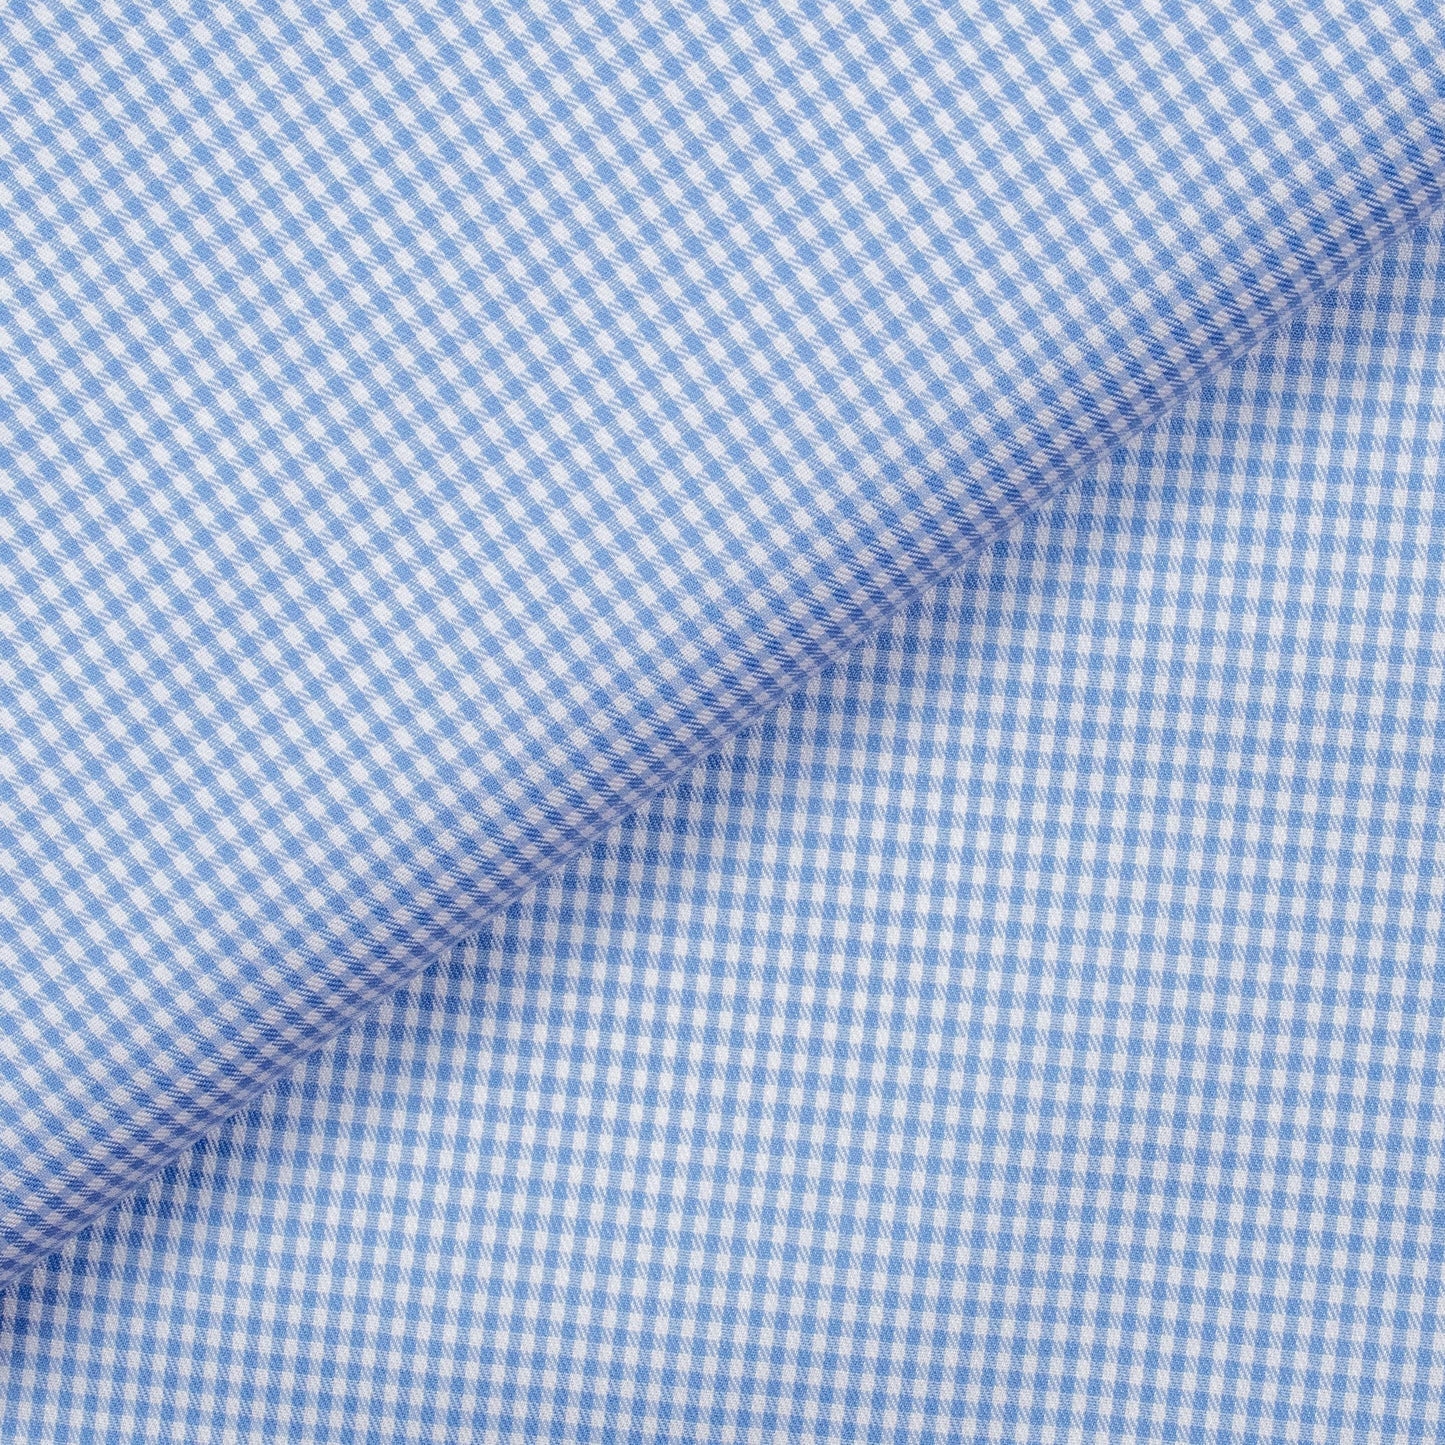 Expo Twill Blue Gingham Cotton Shirt